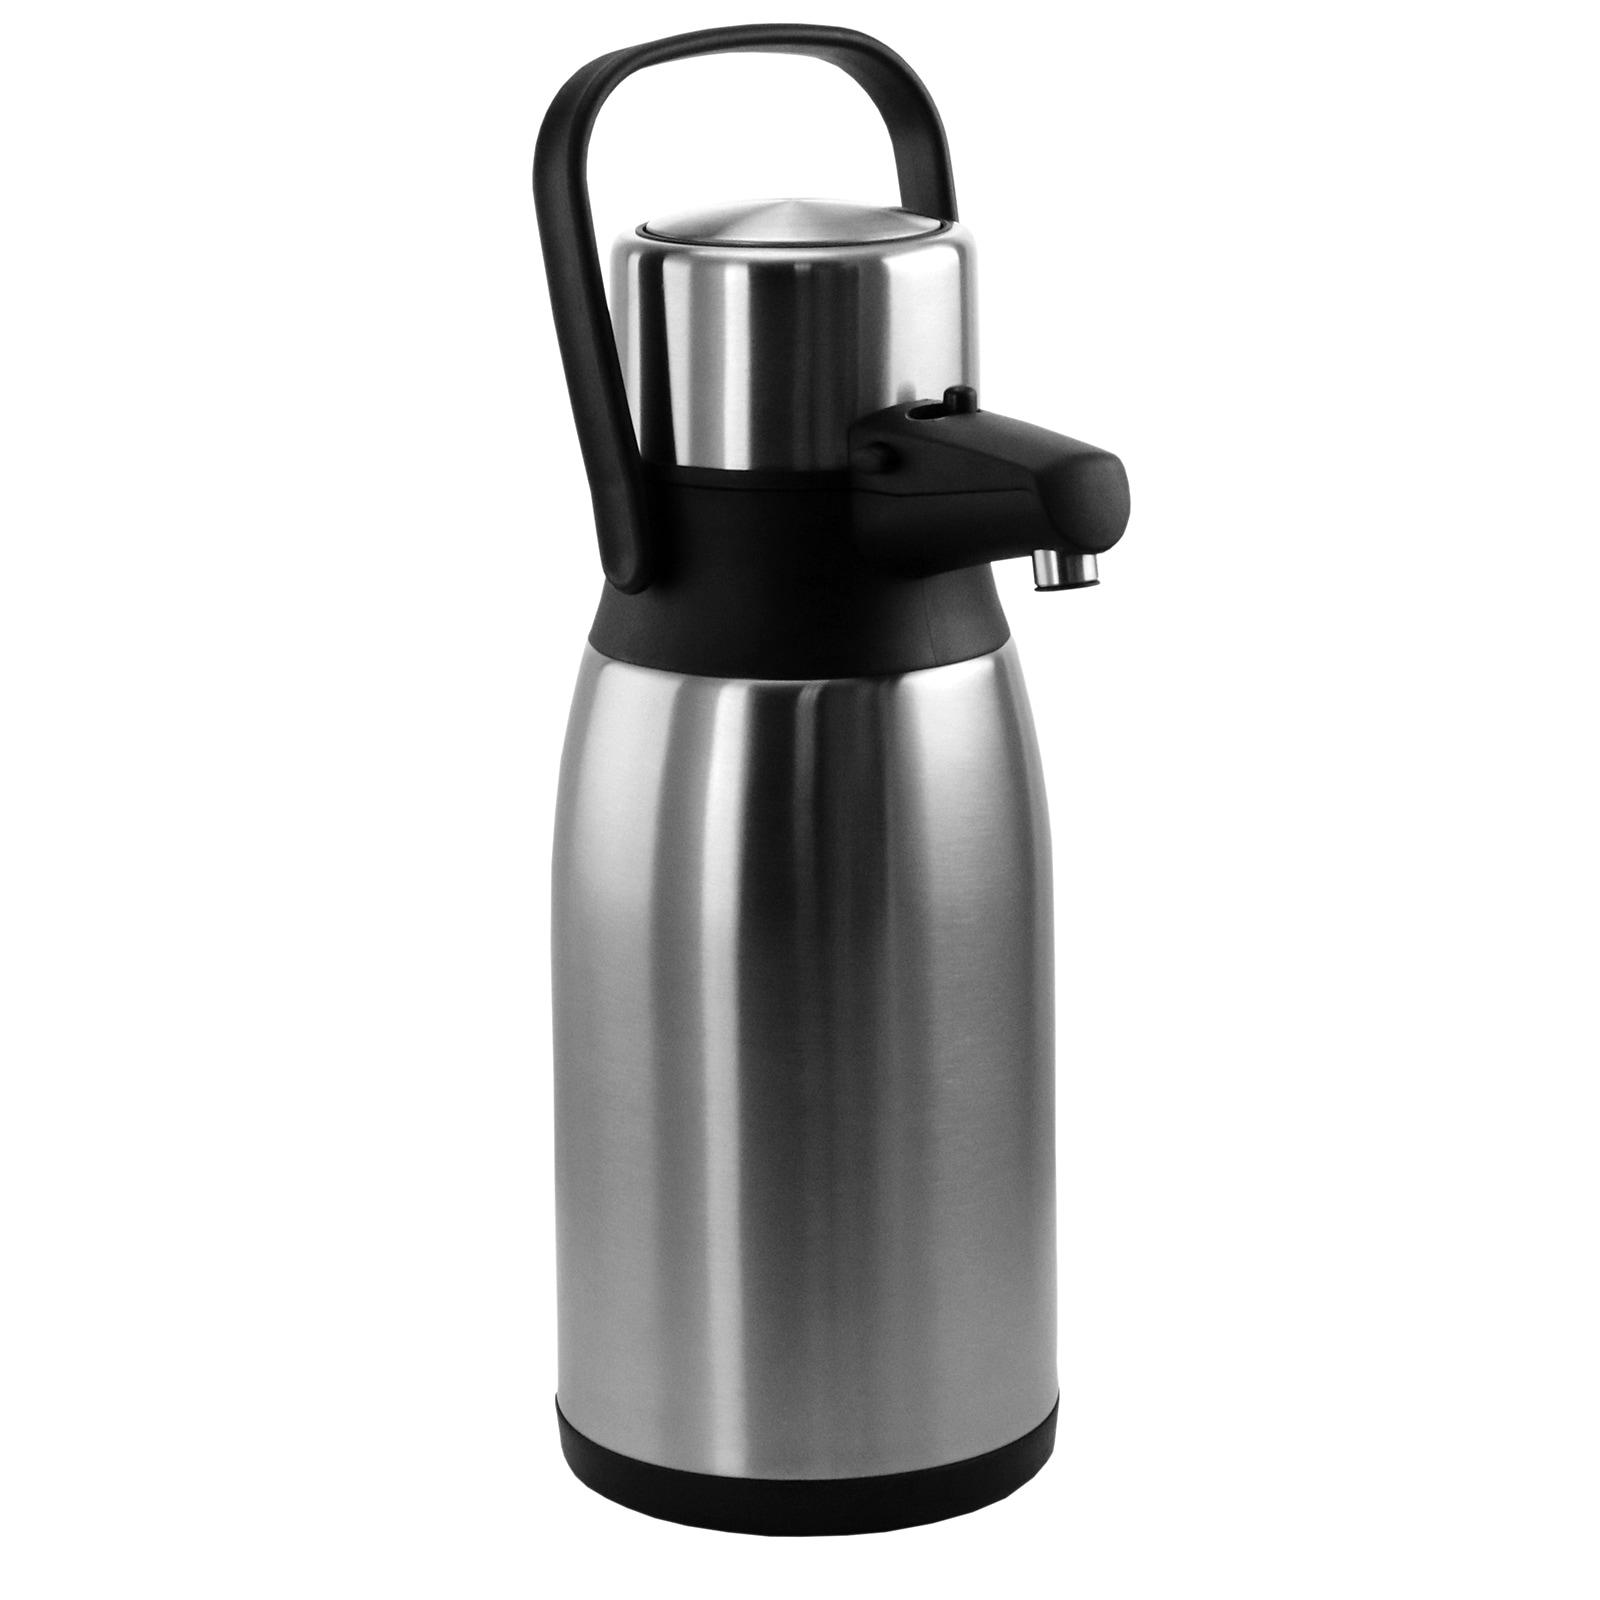 MegaChef 2L Deluxe Stainless Steel Thermal Beverage Carafe for Coffee and Tea